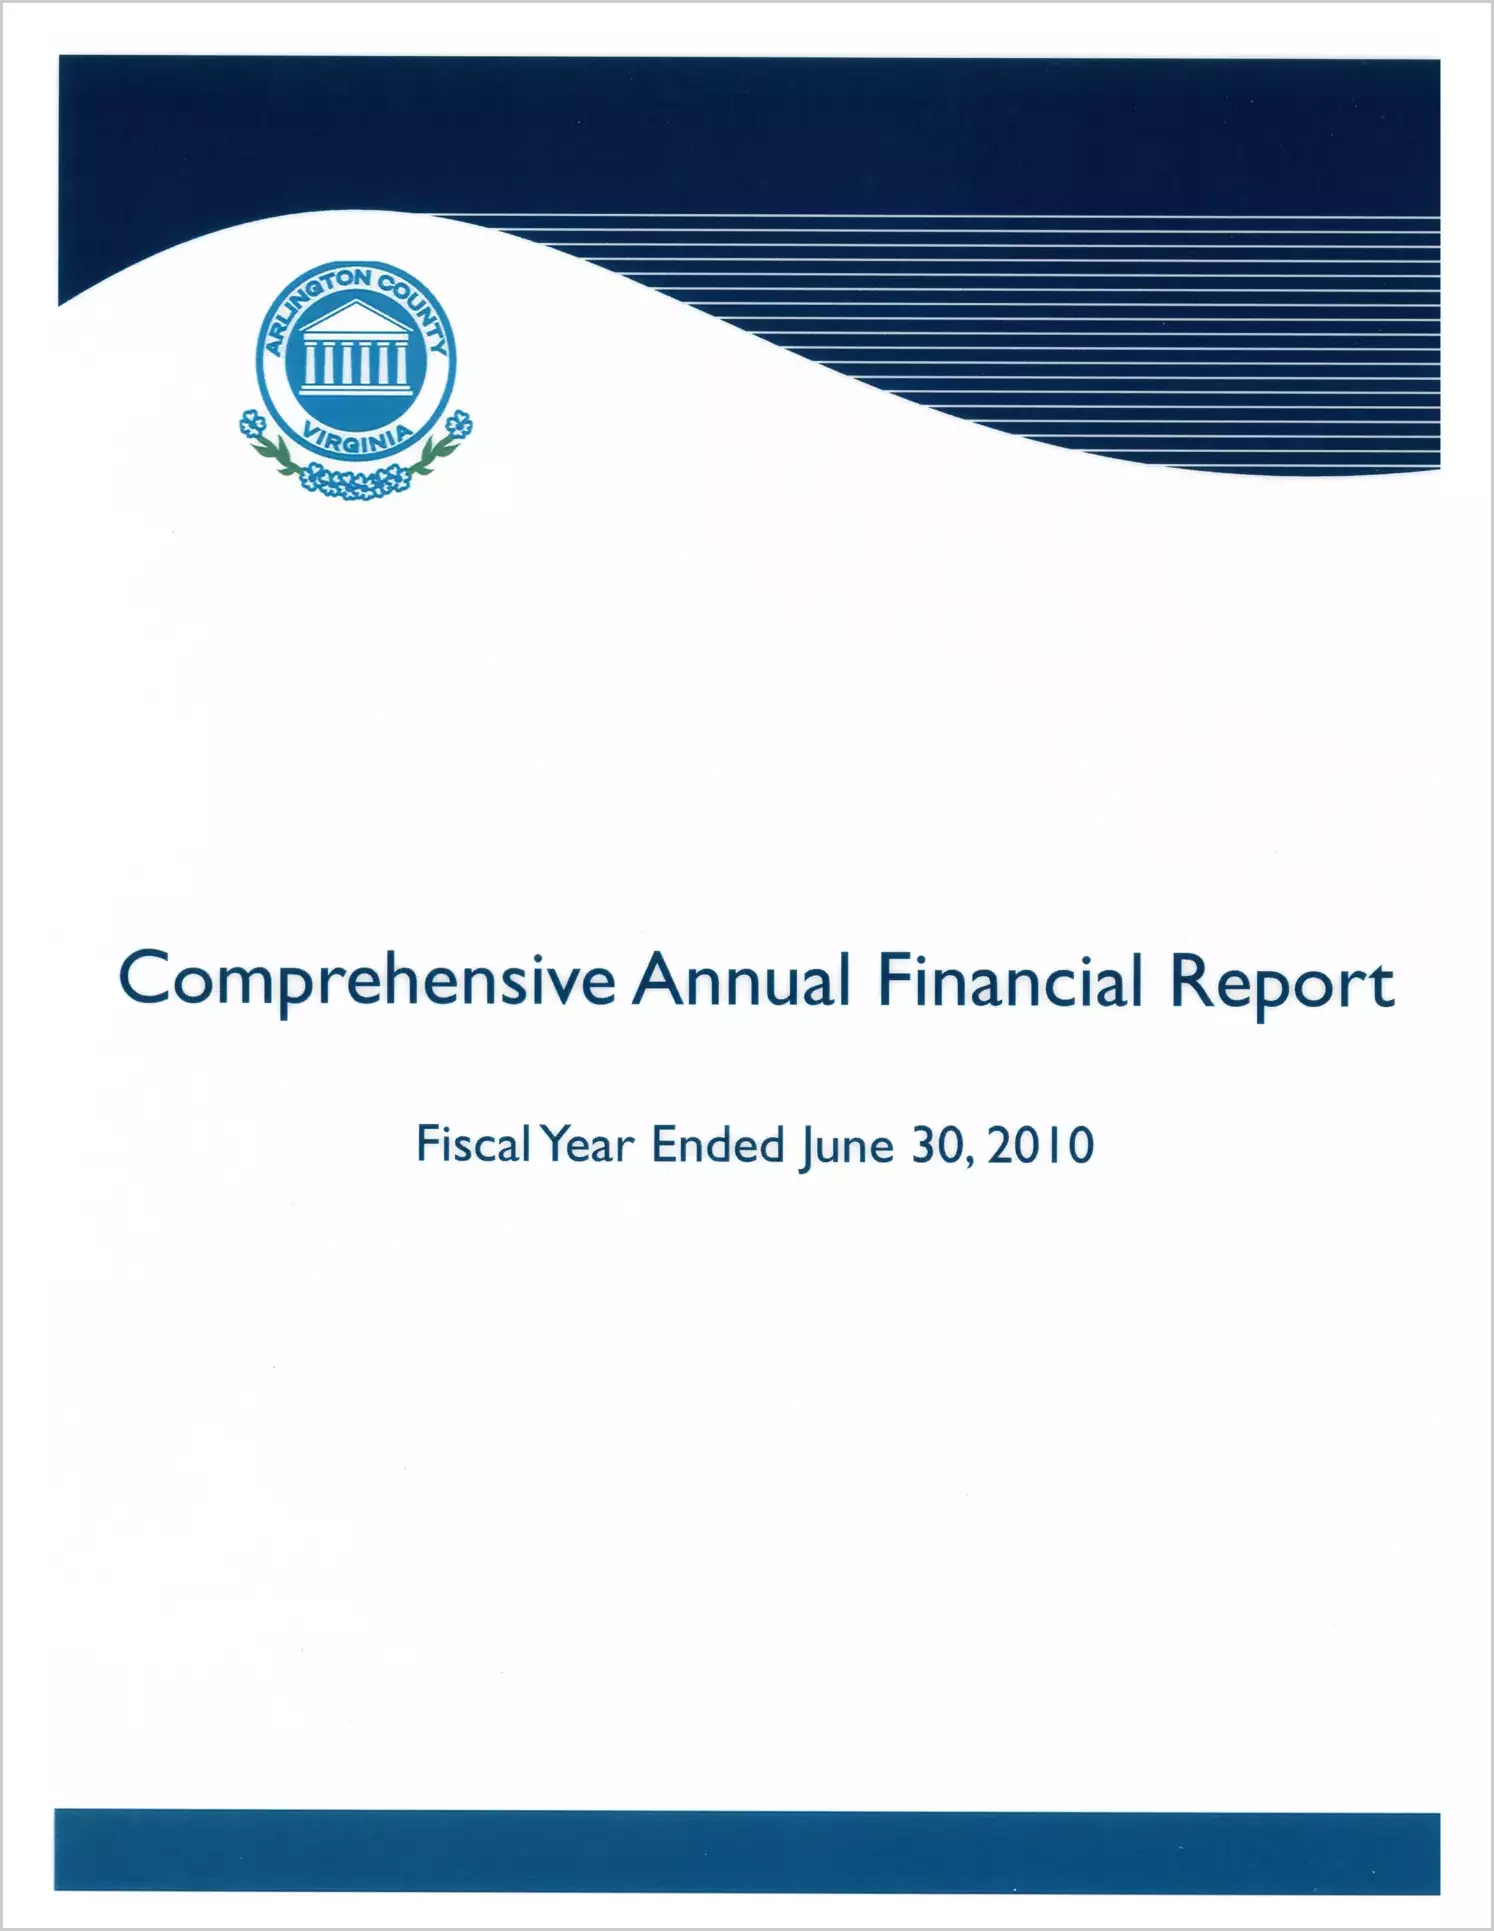 2010 Annual Financial Report for County of Arlington